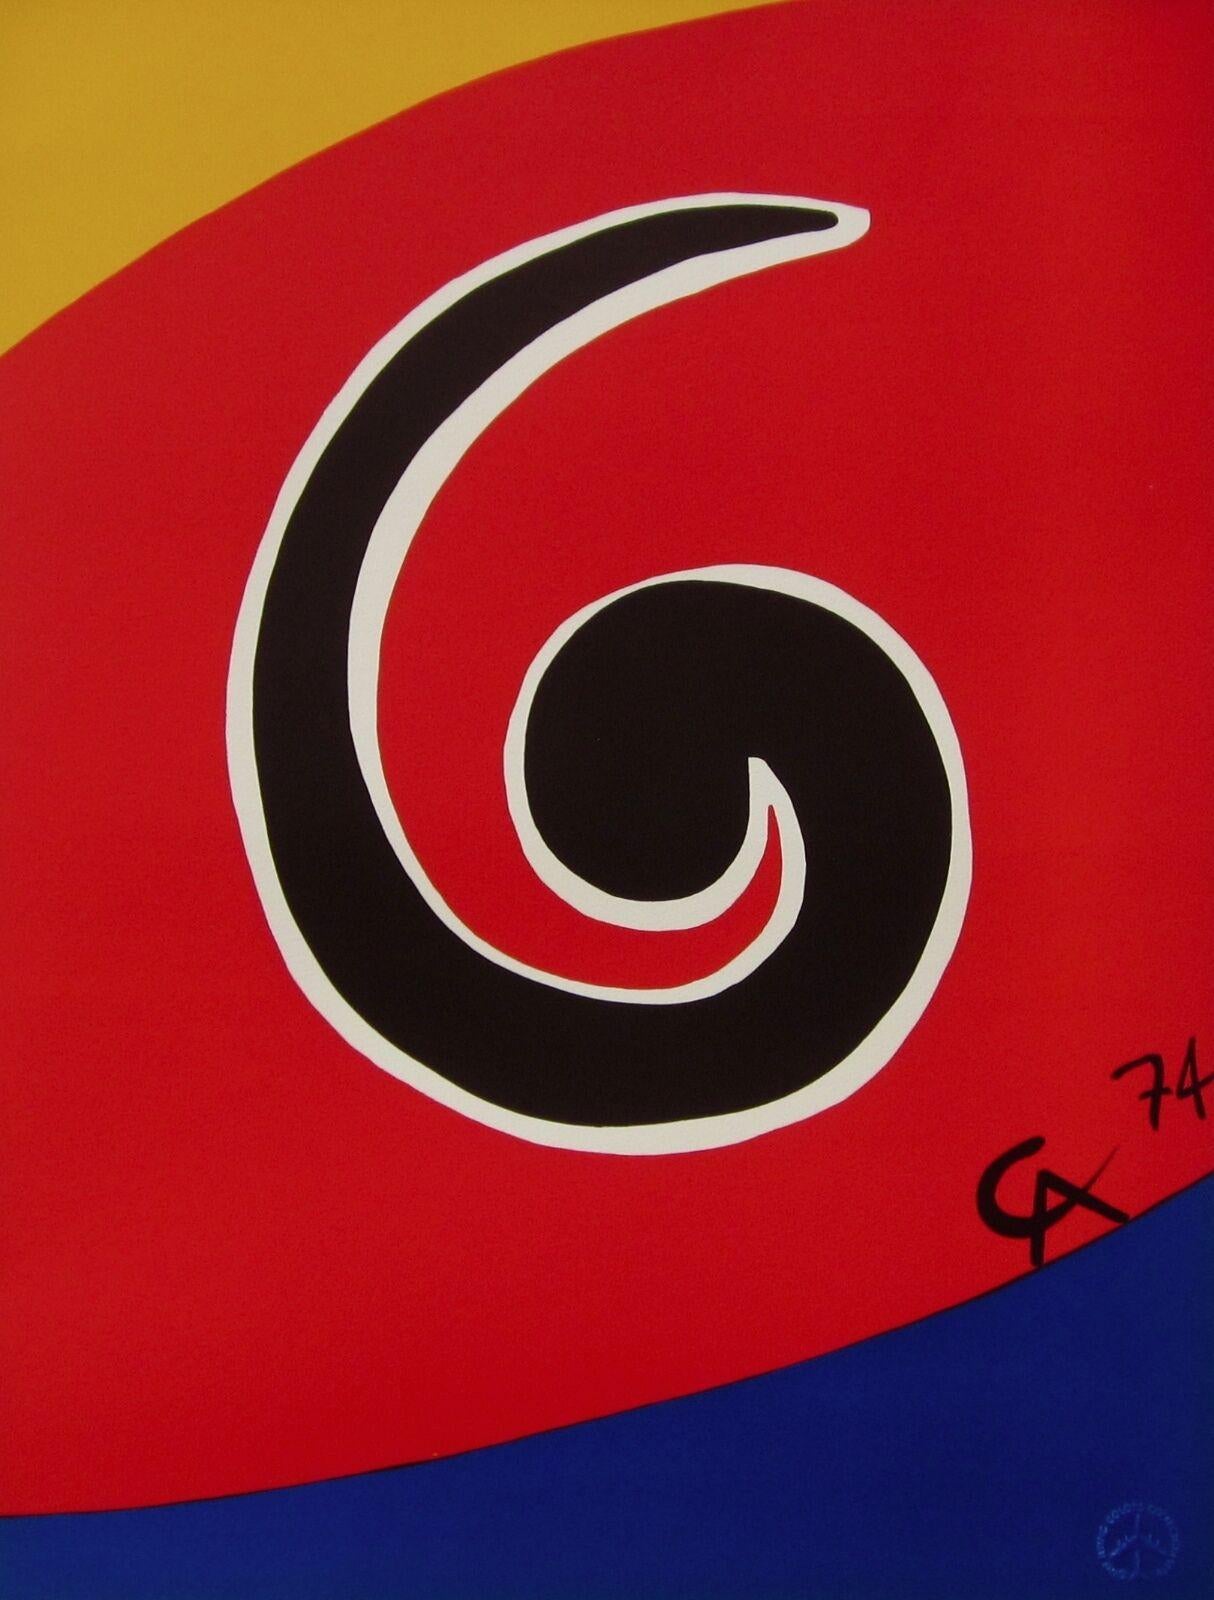 Artist: Alexander Calder (1898-1976)
Title: Sky Swirl (from the Braniff International Airways Flying Colors Collection)
Year: 1974
Medium: Lithograph on Arches paper 
Size: 20 x 26 inches
Condition: Excellent
Edition: 3,000, plus proofs
Inscription: